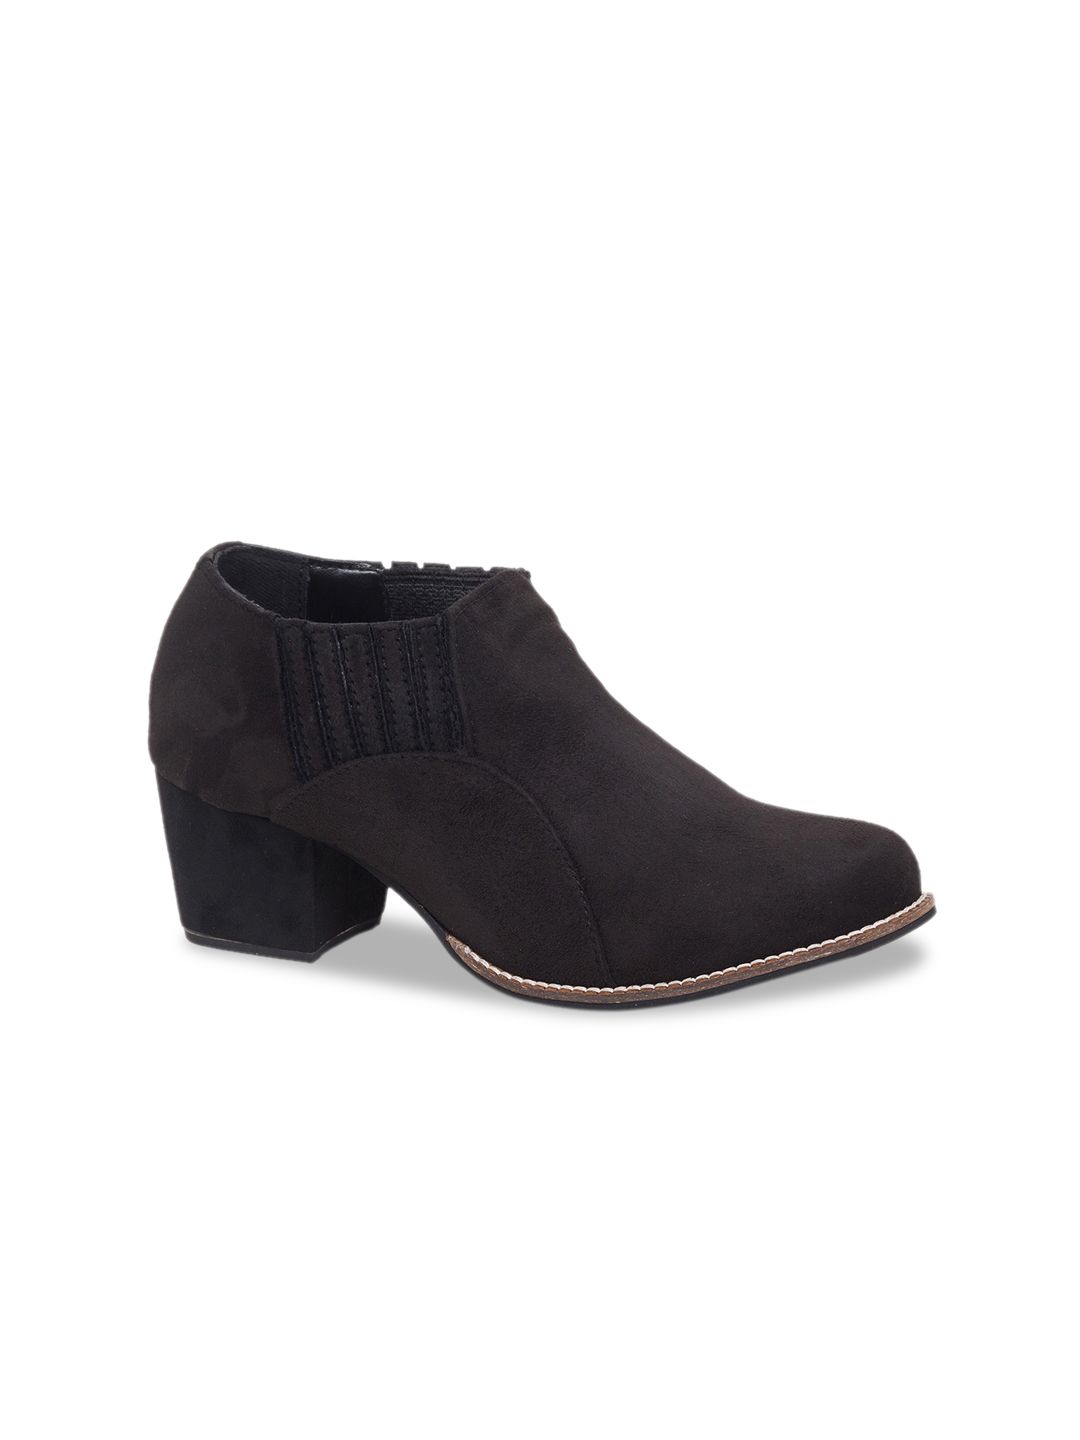 Sole To Soul Woman Black Suede Block Heeled Boots Price in India